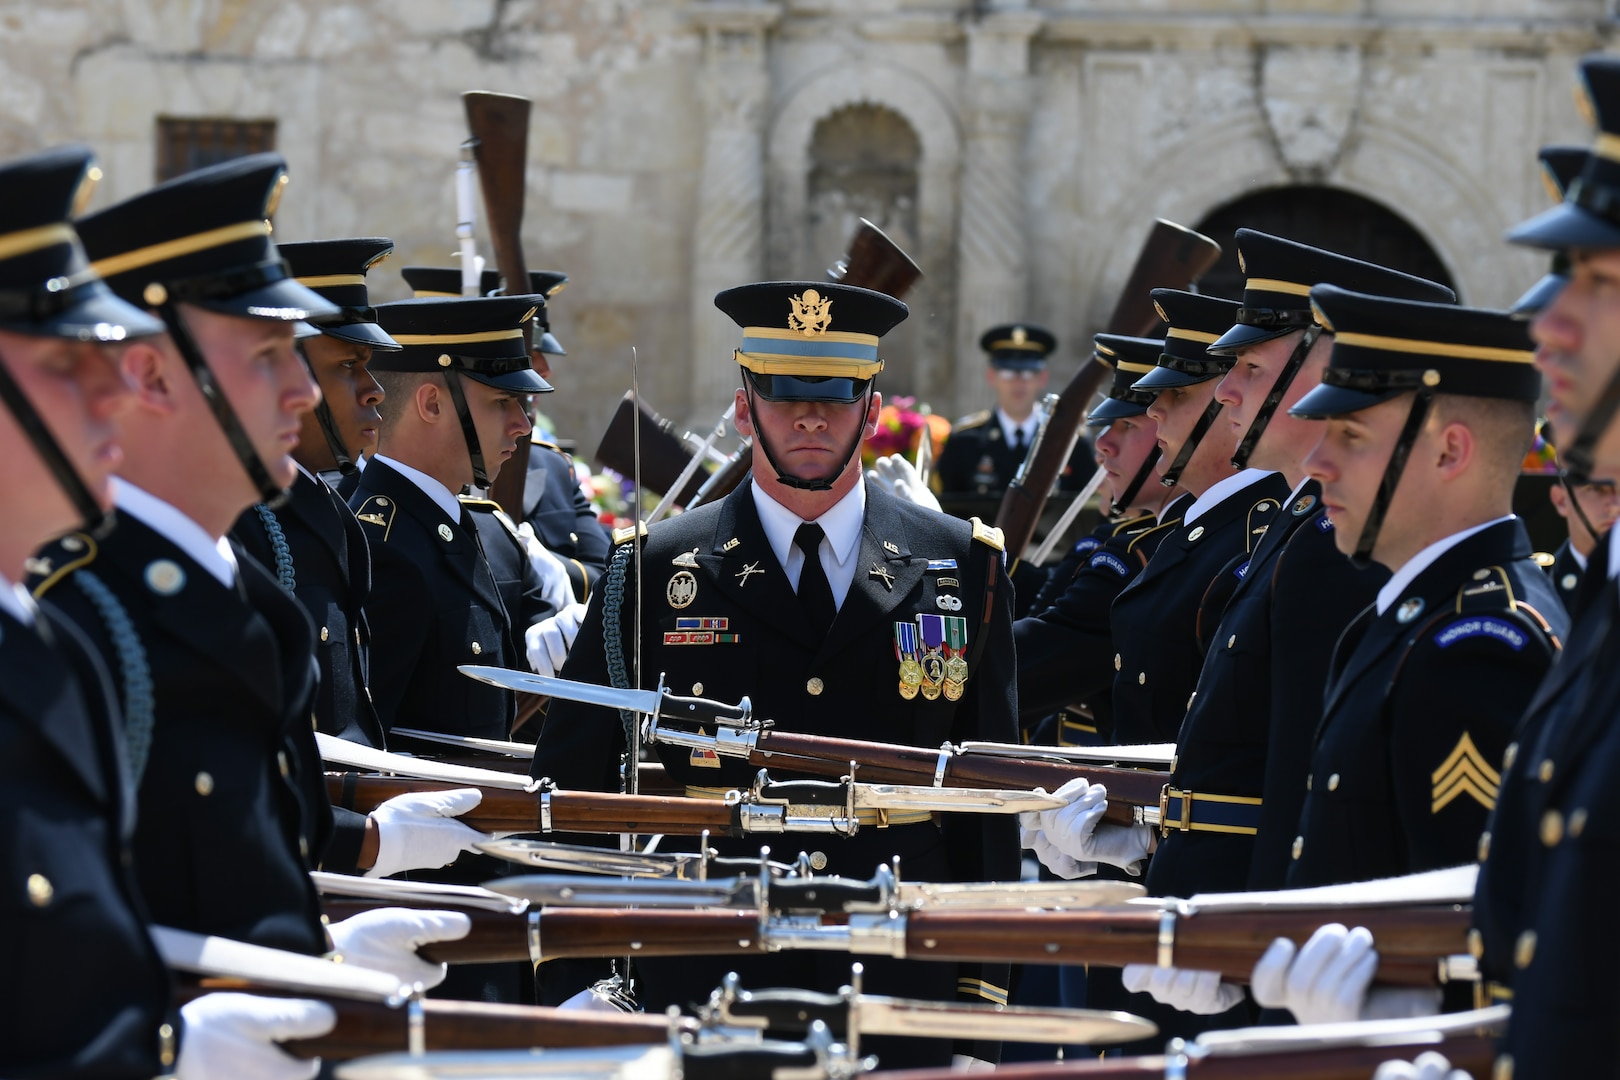 Through unified movement in formation and catches of bayonet-tipped 1903 Springfield Rifles, the U.S. Army Drill Team performs a drill exhibition April 24 during Army Day at the Alamo in front of hundreds of onlookers.